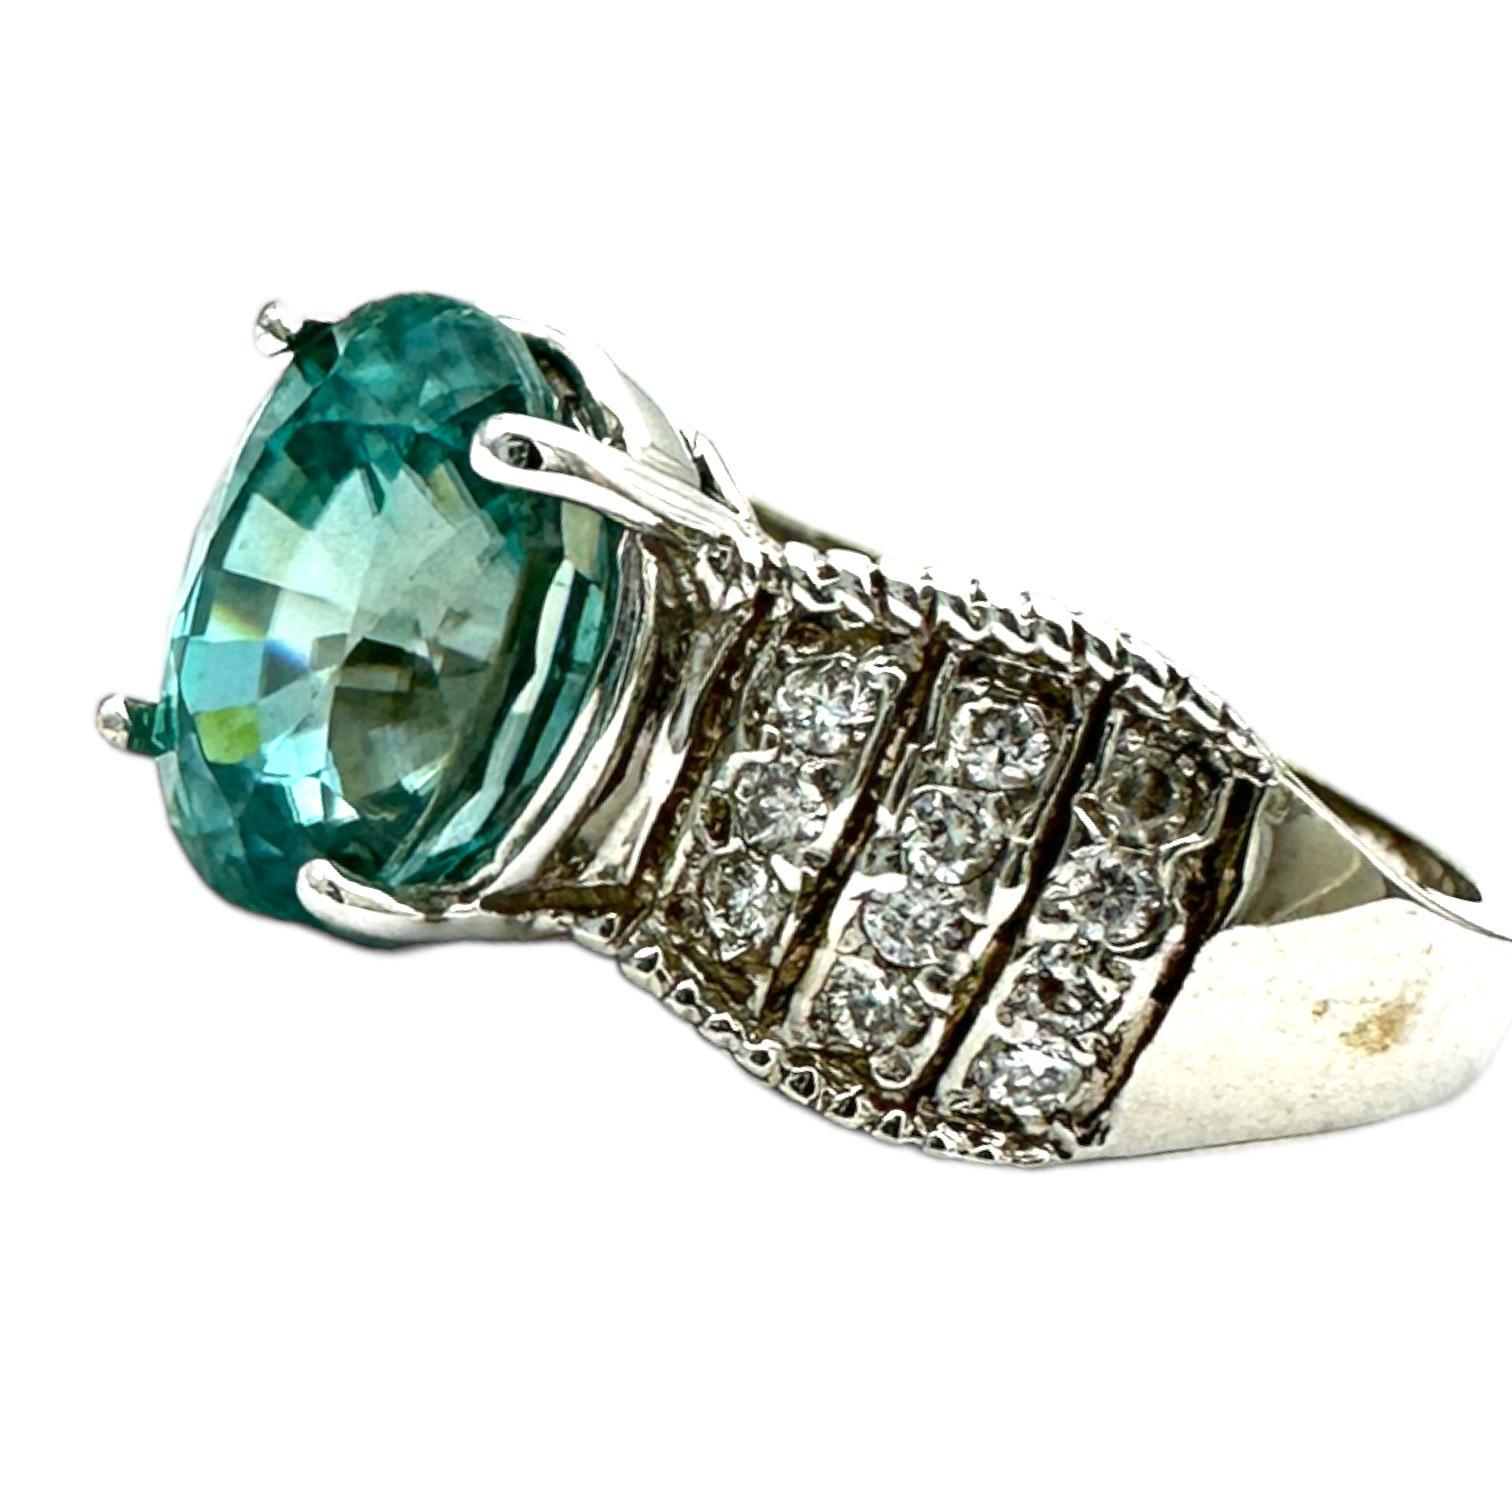 This stunning 14K white gold Paraiba tourmaline diamond ring perfectly blends elegance and glamour. Crafted with a genuine Paraiba tourmaline, this piece will surely draw attention with its eye-catching beauty—the ideal gift for any special